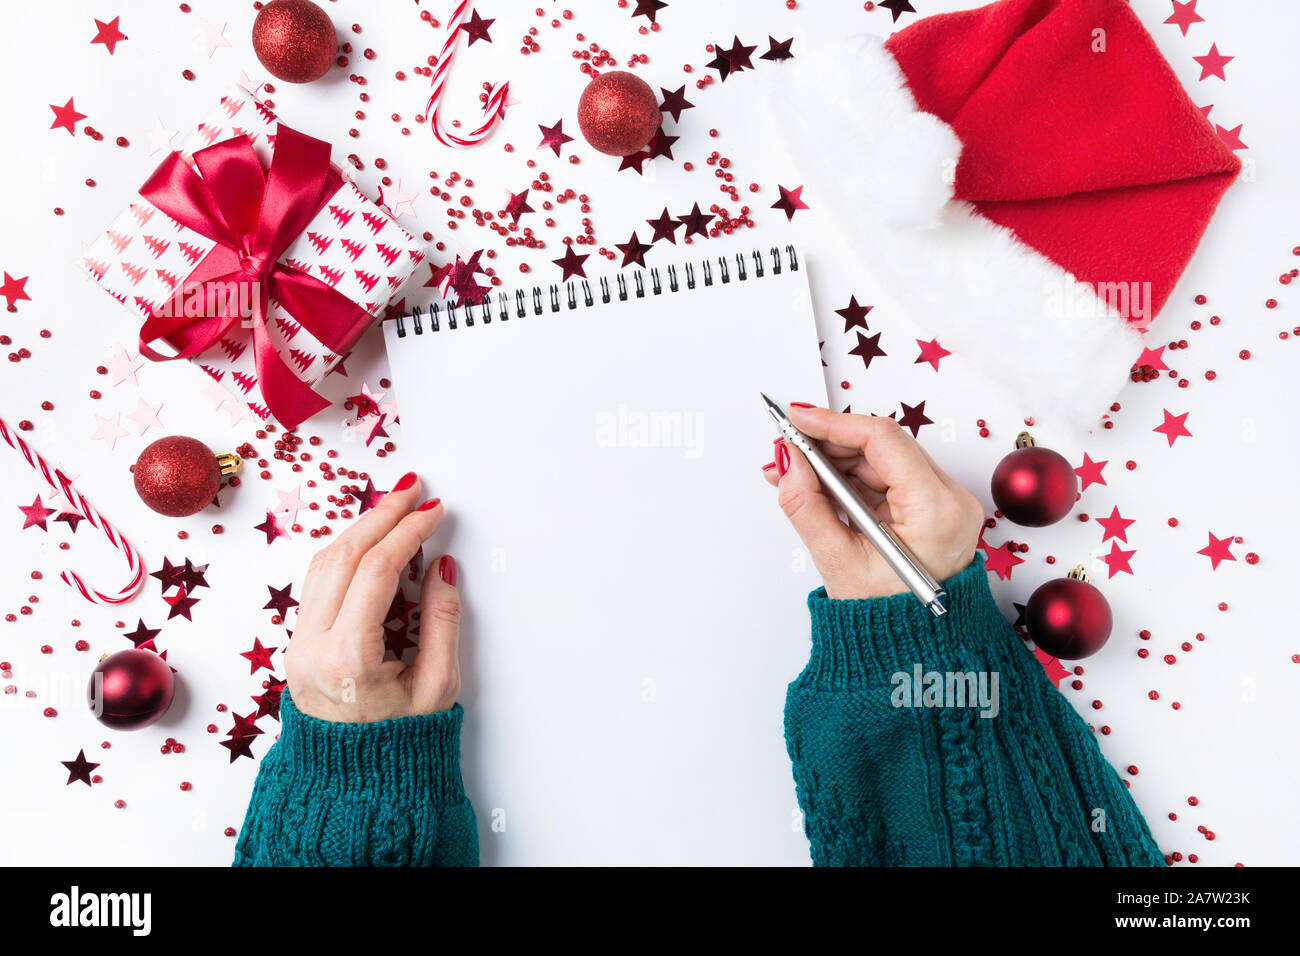 Woman in green sweater writes checklist of plans and dreams for next year. Wish list for Christmas. To Do List for New 2020 year with red Holiday deco Stock Photo